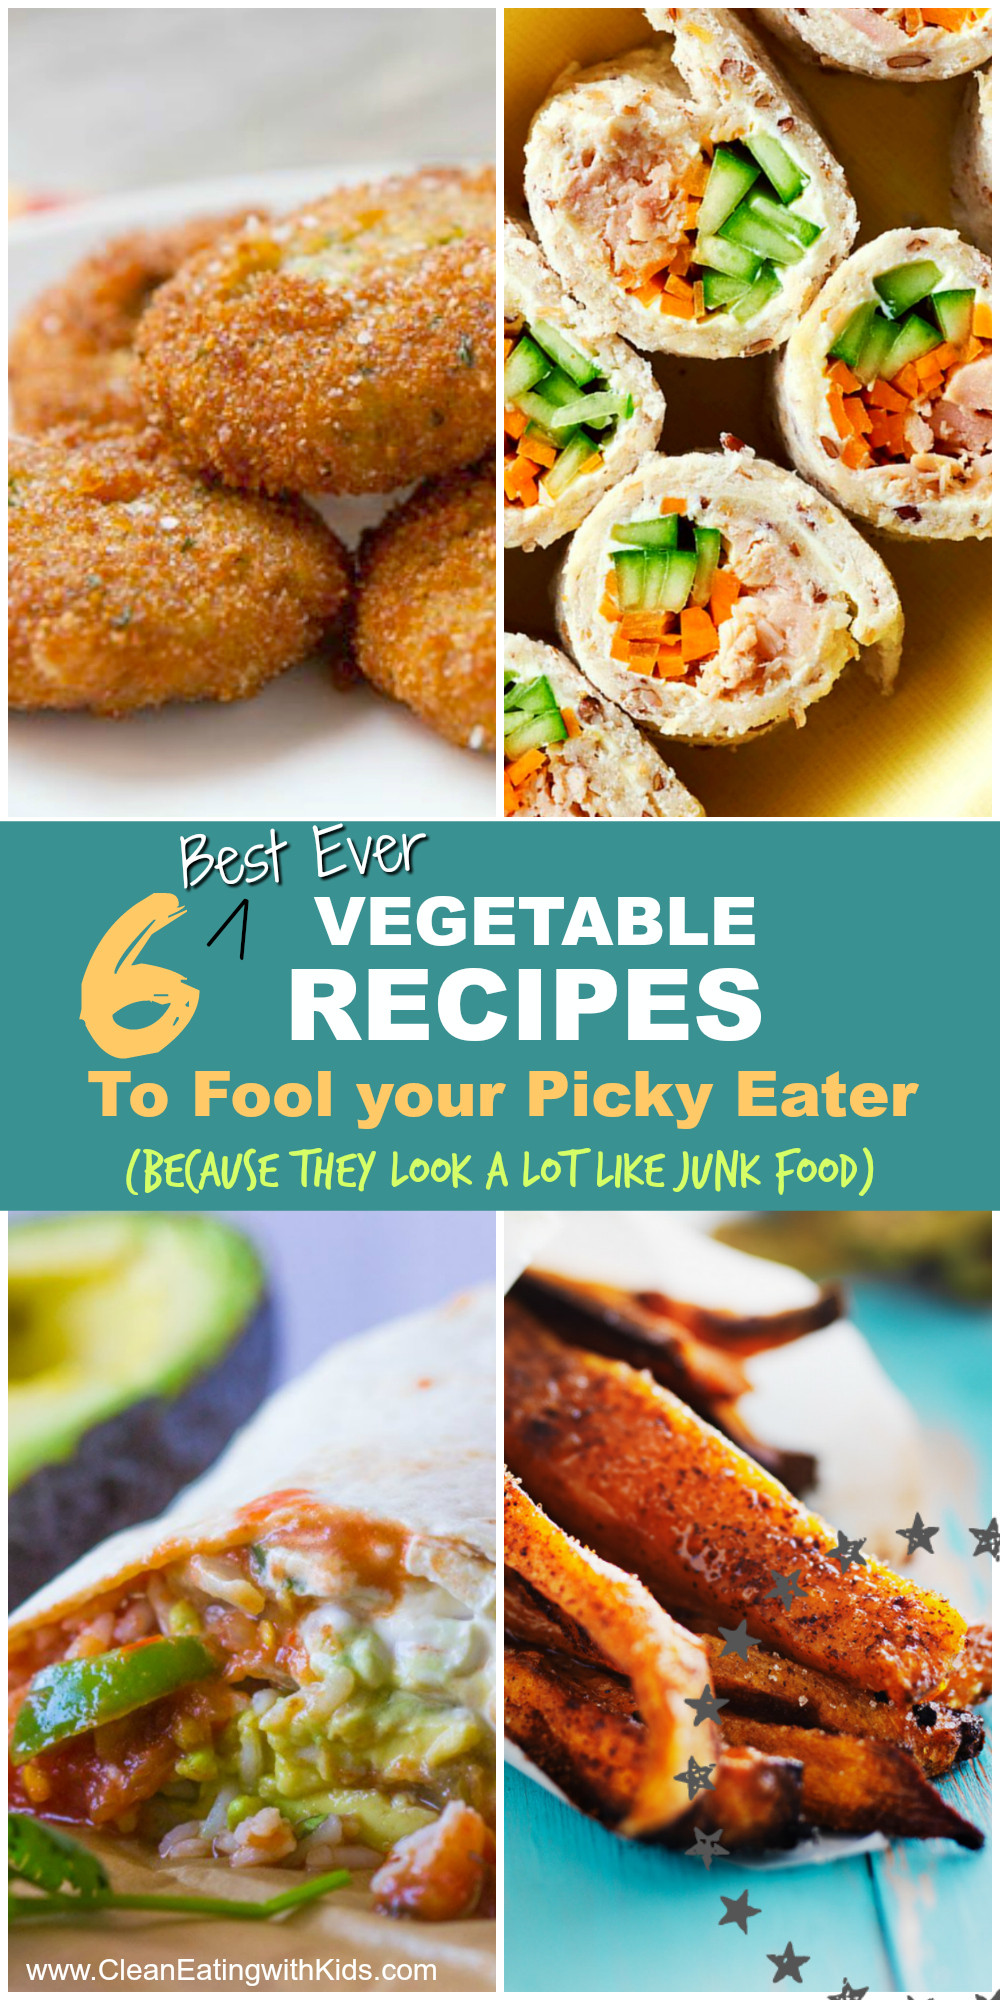 Vegetarian Recipes For Picky Eaters
 6 Best Ve able Recipes to Fool Your Picky Eater Clean